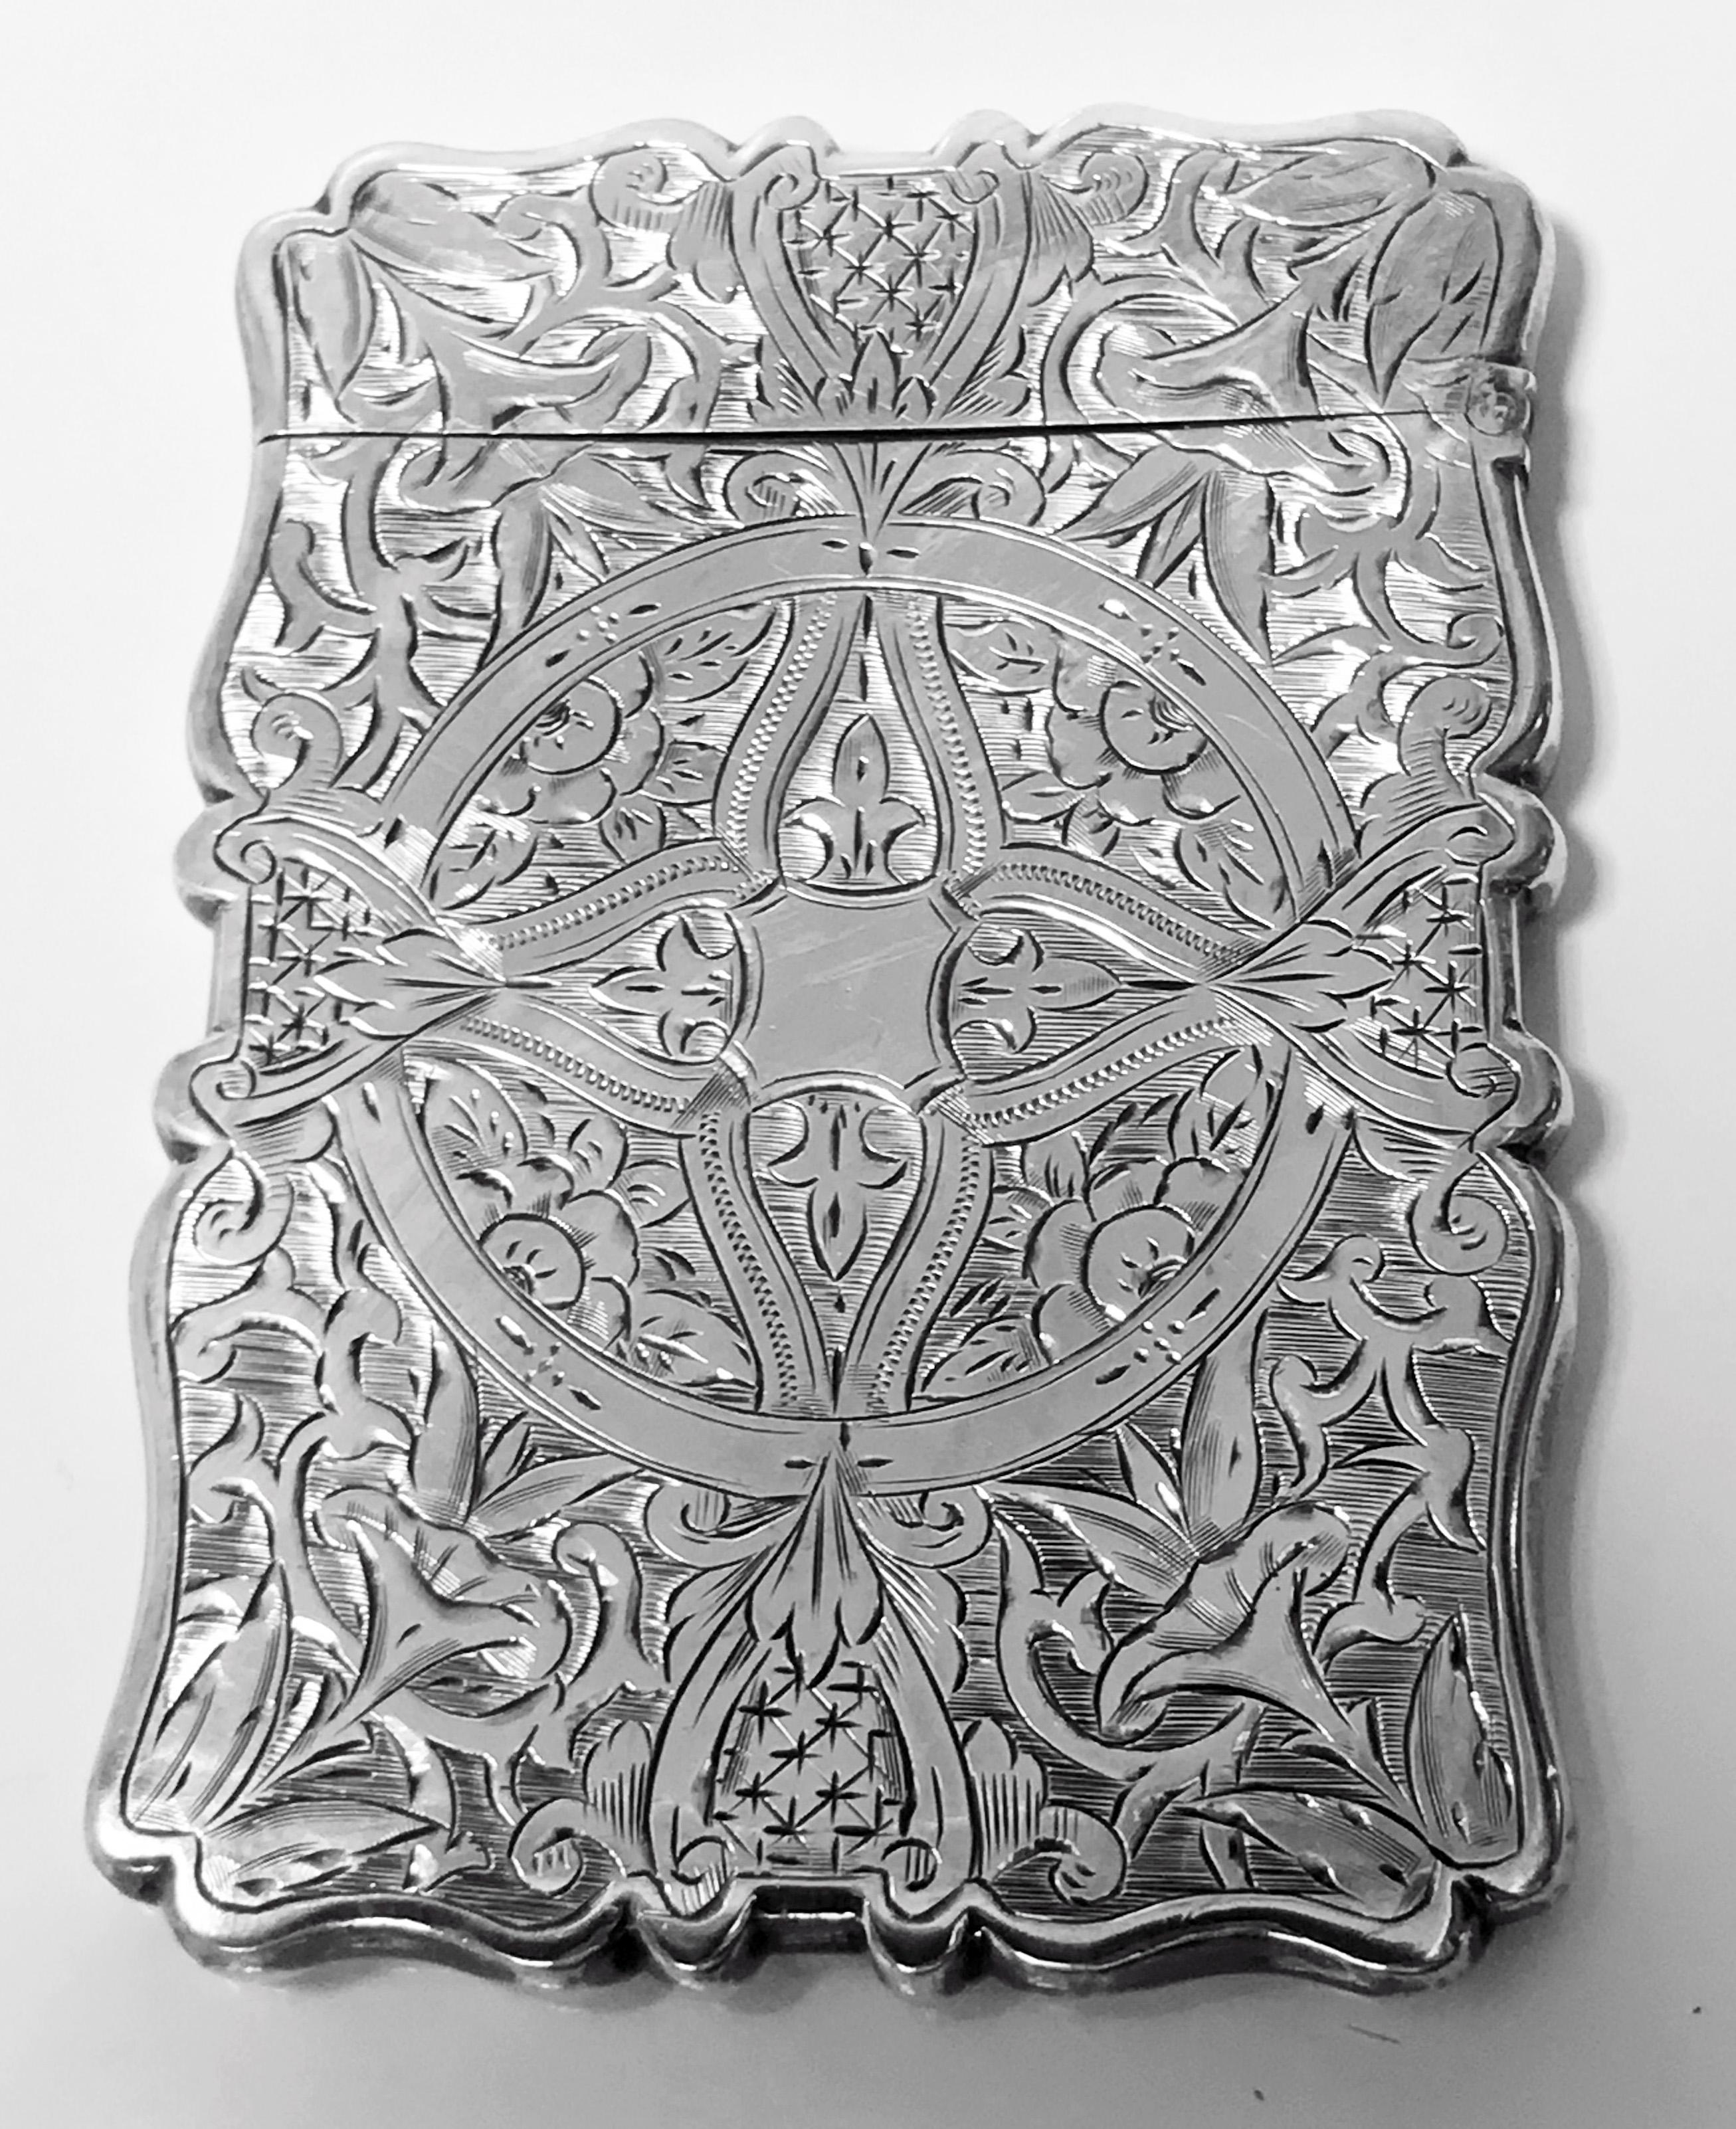 Antique silver card case, Birmingham 1869 Frederick Marson. The card case rectangular form richly engraved foliate diaper and pin pricked decoration, hinged cover. Measures: 9.50 x 7.00 cm. Total item weight: 54.88 grams.